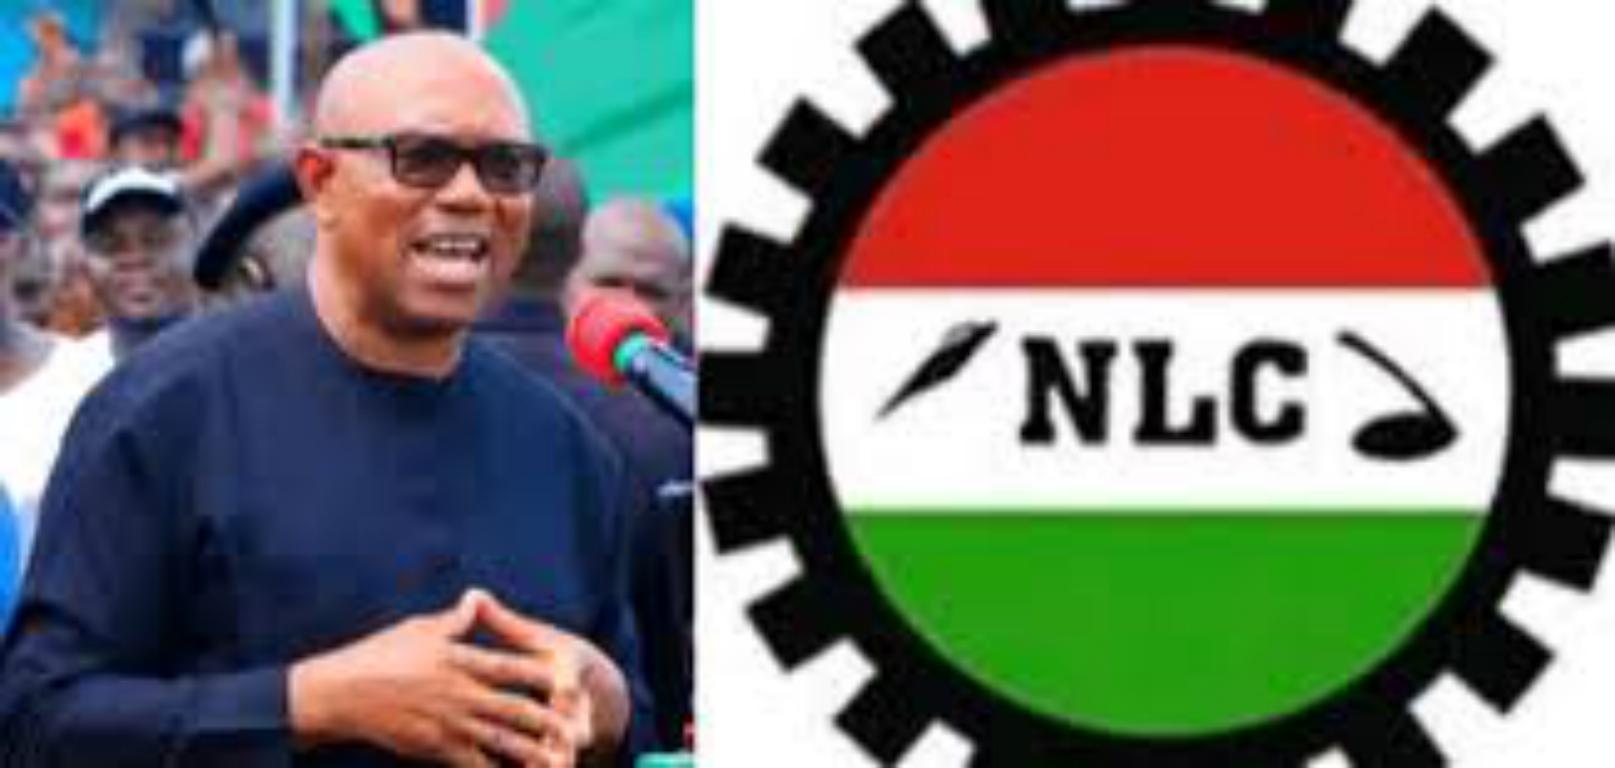 NLC Supports Peter Obi: But What Does Obi Stand For? - Socialist Workers  League